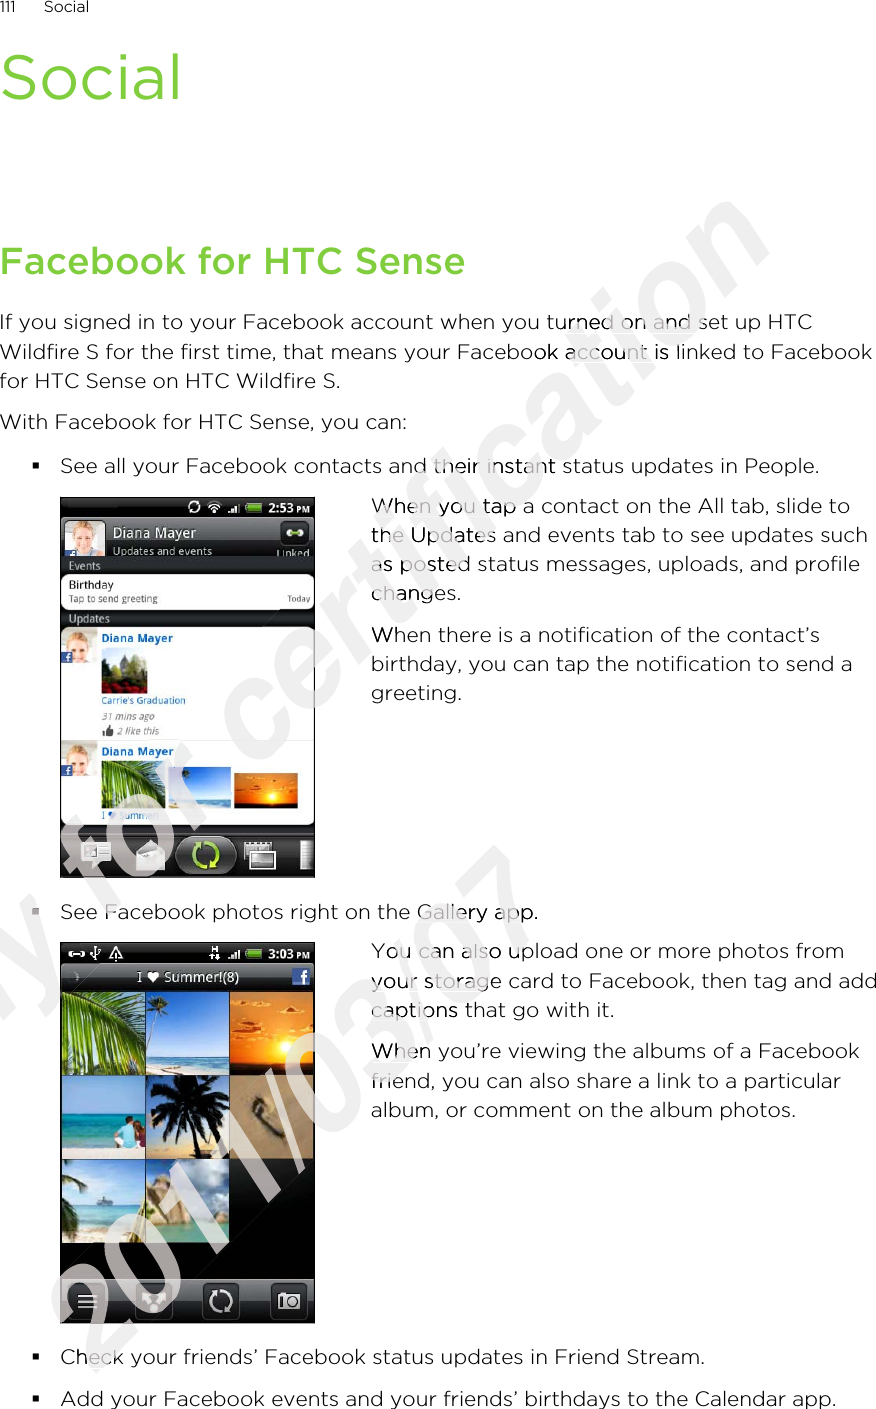 SocialFacebook for HTC SenseIf you signed in to your Facebook account when you turned on and set up HTCWildfire S for the first time, that means your Facebook account is linked to Facebookfor HTC Sense on HTC Wildfire S.With Facebook for HTC Sense, you can:§See all your Facebook contacts and their instant status updates in People.When you tap a contact on the All tab, slide tothe Updates and events tab to see updates suchas posted status messages, uploads, and profilechanges.When there is a notification of the contact’sbirthday, you can tap the notification to send agreeting.§See Facebook photos right on the Gallery app.You can also upload one or more photos fromyour storage card to Facebook, then tag and addcaptions that go with it.When you’re viewing the albums of a Facebookfriend, you can also share a link to a particularalbum, or comment on the album photos.§Check your friends’ Facebook status updates in Friend Stream.§Add your Facebook events and your friends’ birthdays to the Calendar app.111 SocialOnly §Only §Only Only Only for for for for See Facebook photos right on the Gallery app.for See Facebook photos right on the Gallery app.certification If you signed in to your Facebook account when you turned on and set up HTCcertification If you signed in to your Facebook account when you turned on and set up HTCWildfire S for the first time, that means your Facebook account is linked to Facebookcertification Wildfire S for the first time, that means your Facebook account is linked to FacebookSee all your Facebook contacts and their instant status updates in People.certification See all your Facebook contacts and their instant status updates in People.certification certification When you tap a contact on the All tab, slide tocertification When you tap a contact on the All tab, slide tothe Updates and events tab to see updates suchcertification the Updates and events tab to see updates suchas posted status messages, uploads, and profilecertification as posted status messages, uploads, and profilechanges.certification changes.When there is a notification of the contact’scertification When there is a notification of the contact’s2011/03/07See Facebook photos right on the Gallery app.2011/03/07See Facebook photos right on the Gallery app.2011/03/072011/03/072011/03/072011/03/072011/03/07You can also upload one or more photos from2011/03/07You can also upload one or more photos fromyour storage card to Facebook, then tag and add2011/03/07your storage card to Facebook, then tag and addcaptions that go with it.2011/03/07captions that go with it.When you’re viewing the albums of a Facebook2011/03/07When you’re viewing the albums of a Facebook2011/03/07friend, you can also share a link to a particular2011/03/07friend, you can also share a link to a particularCheck your friends’ Facebook status updates in Friend Stream.2011/03/07Check your friends’ Facebook status updates in Friend Stream.